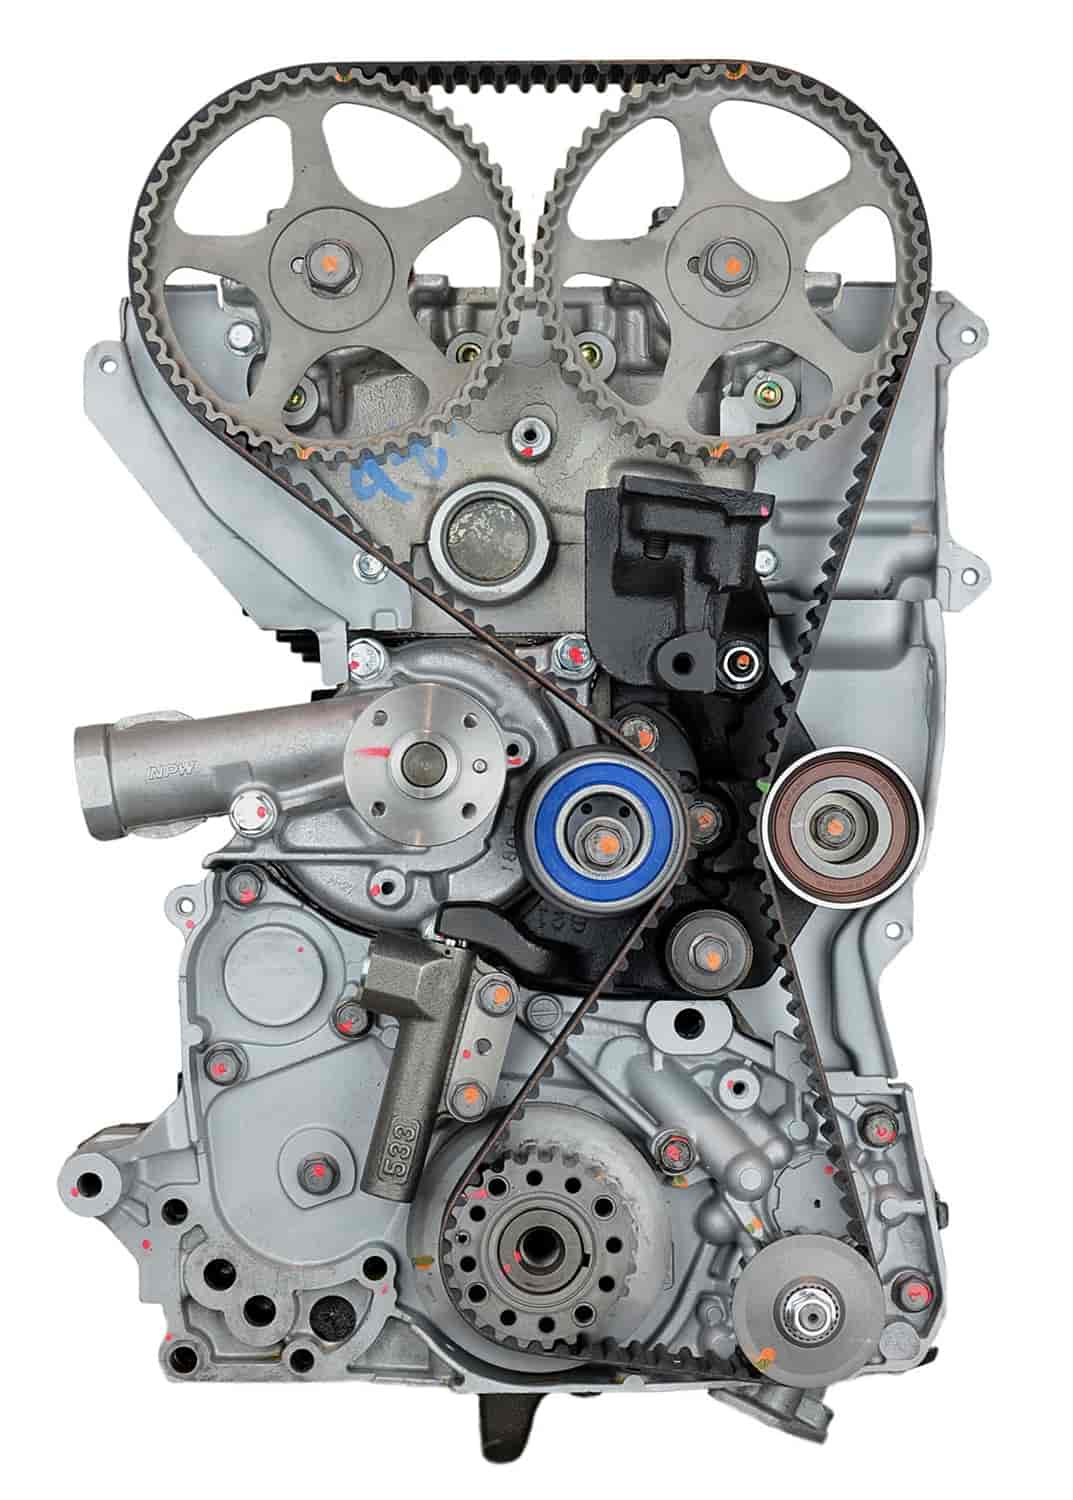 Remanufactured Crate Engine for 1990-1992 Mitsubishi, Eagle, & Plymouth with Turbo 2.0L L4